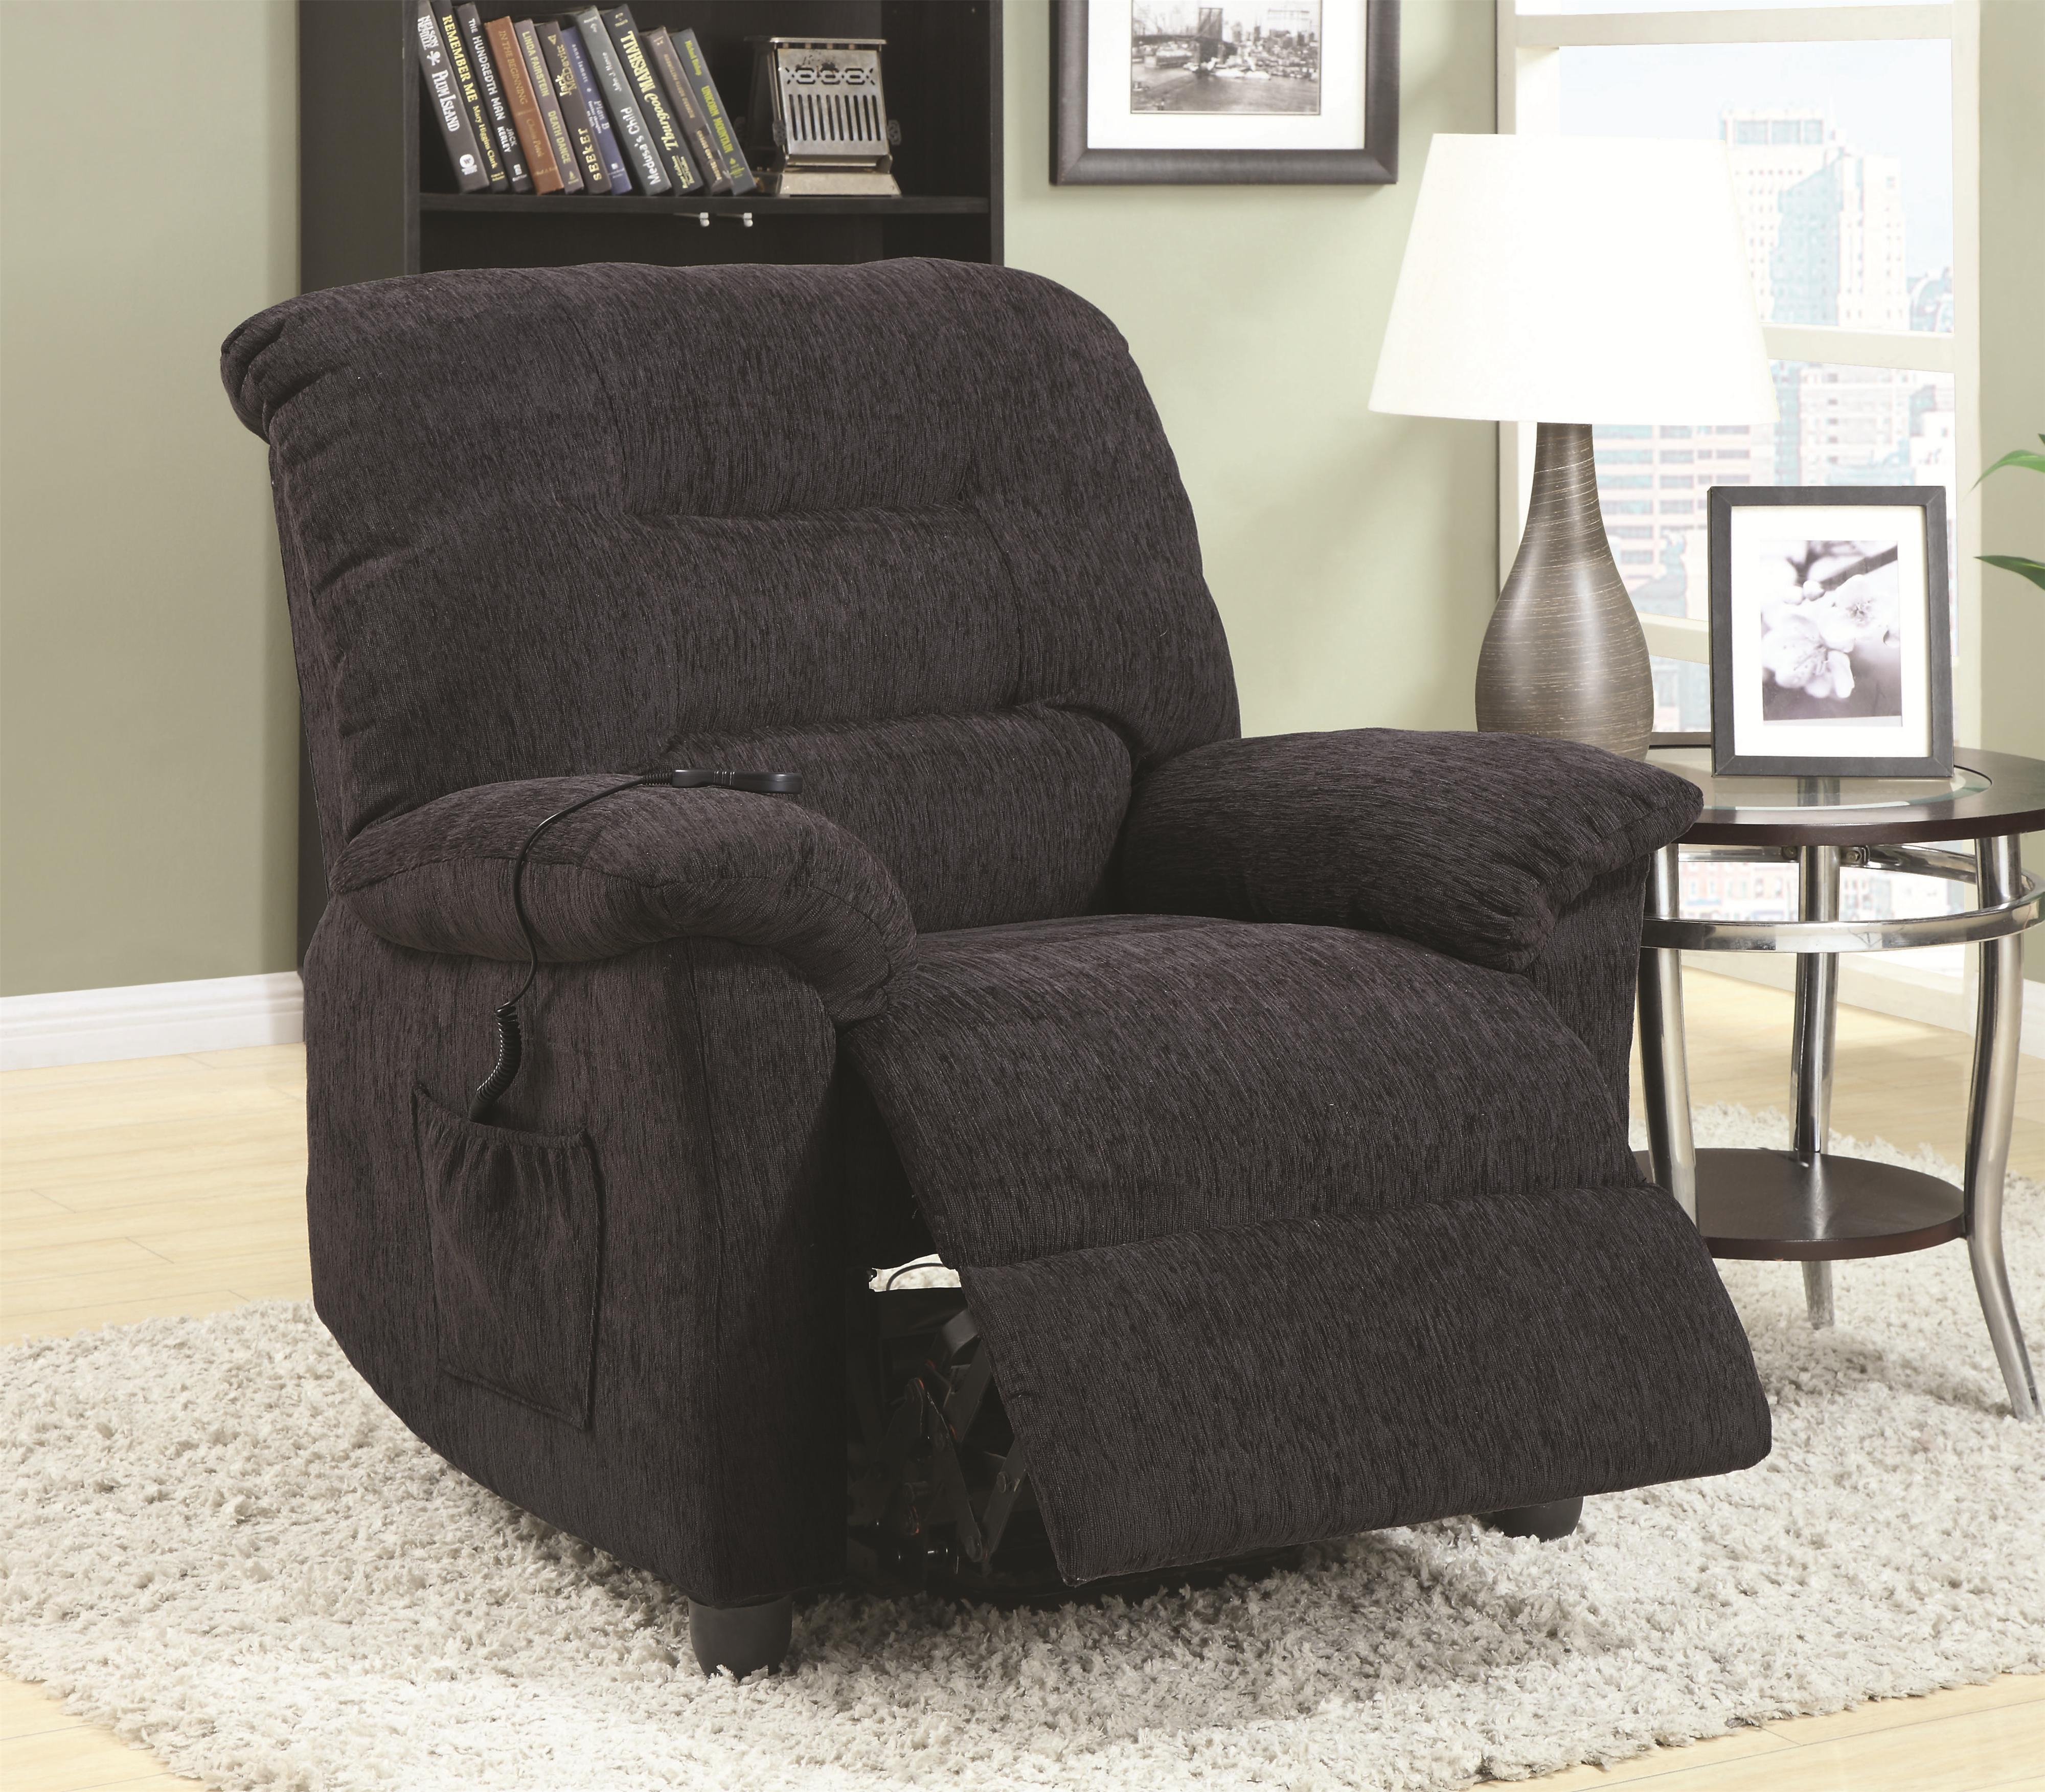 Type 3 Designs Power Lift Soft Fabric Upholstery Recliner Living Room Sofa Chair with Remote